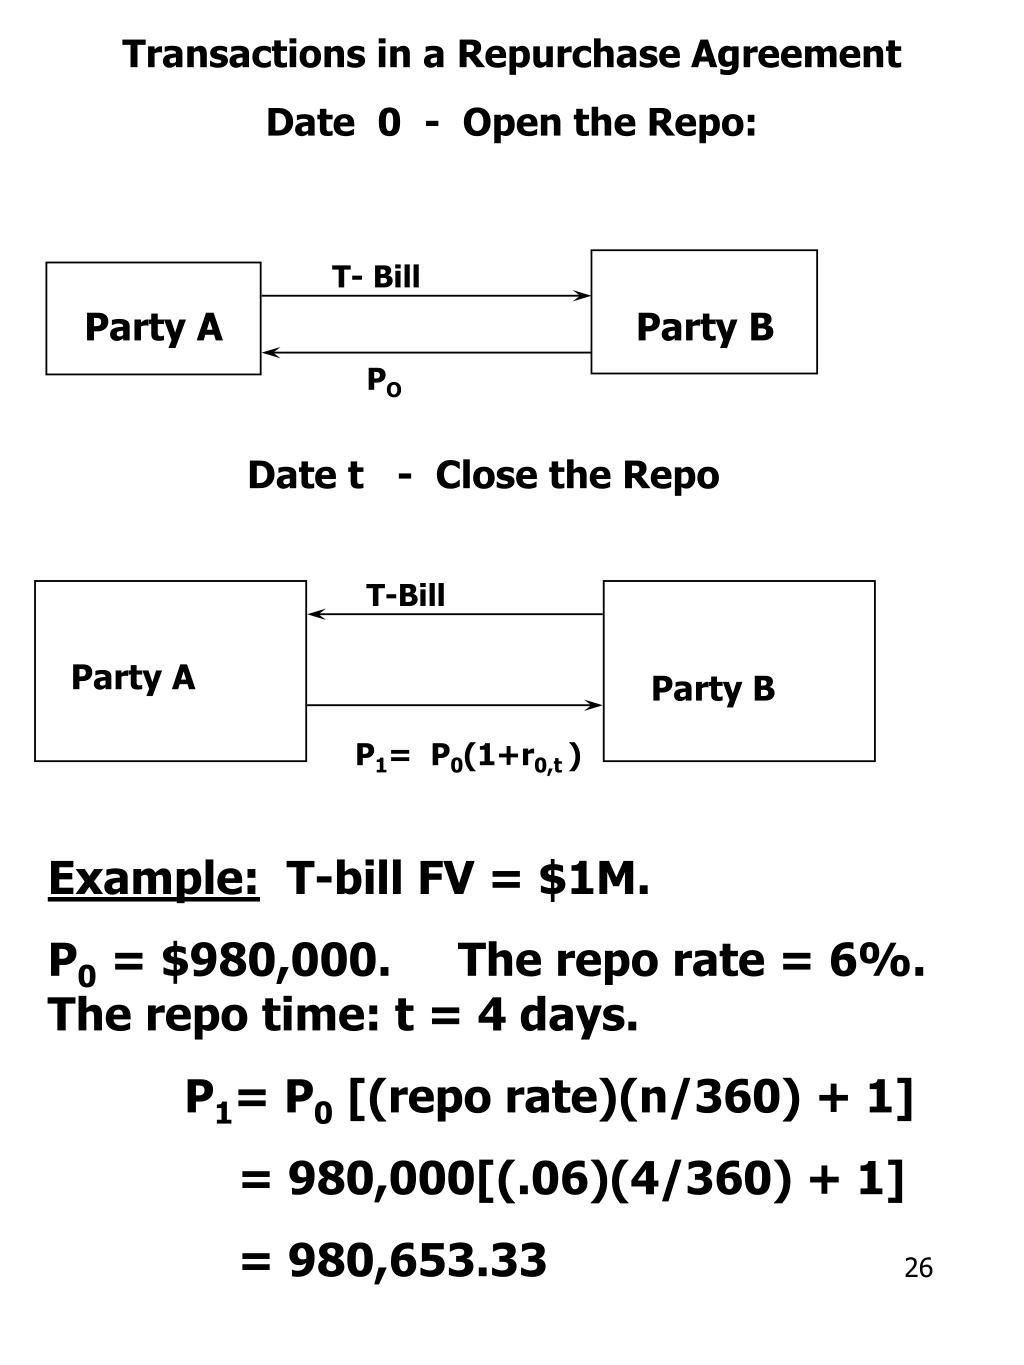 Repurchase Agreement Example Ppt A Pure Discount Bond Does Not Pay Cupons Until Its Maturity C